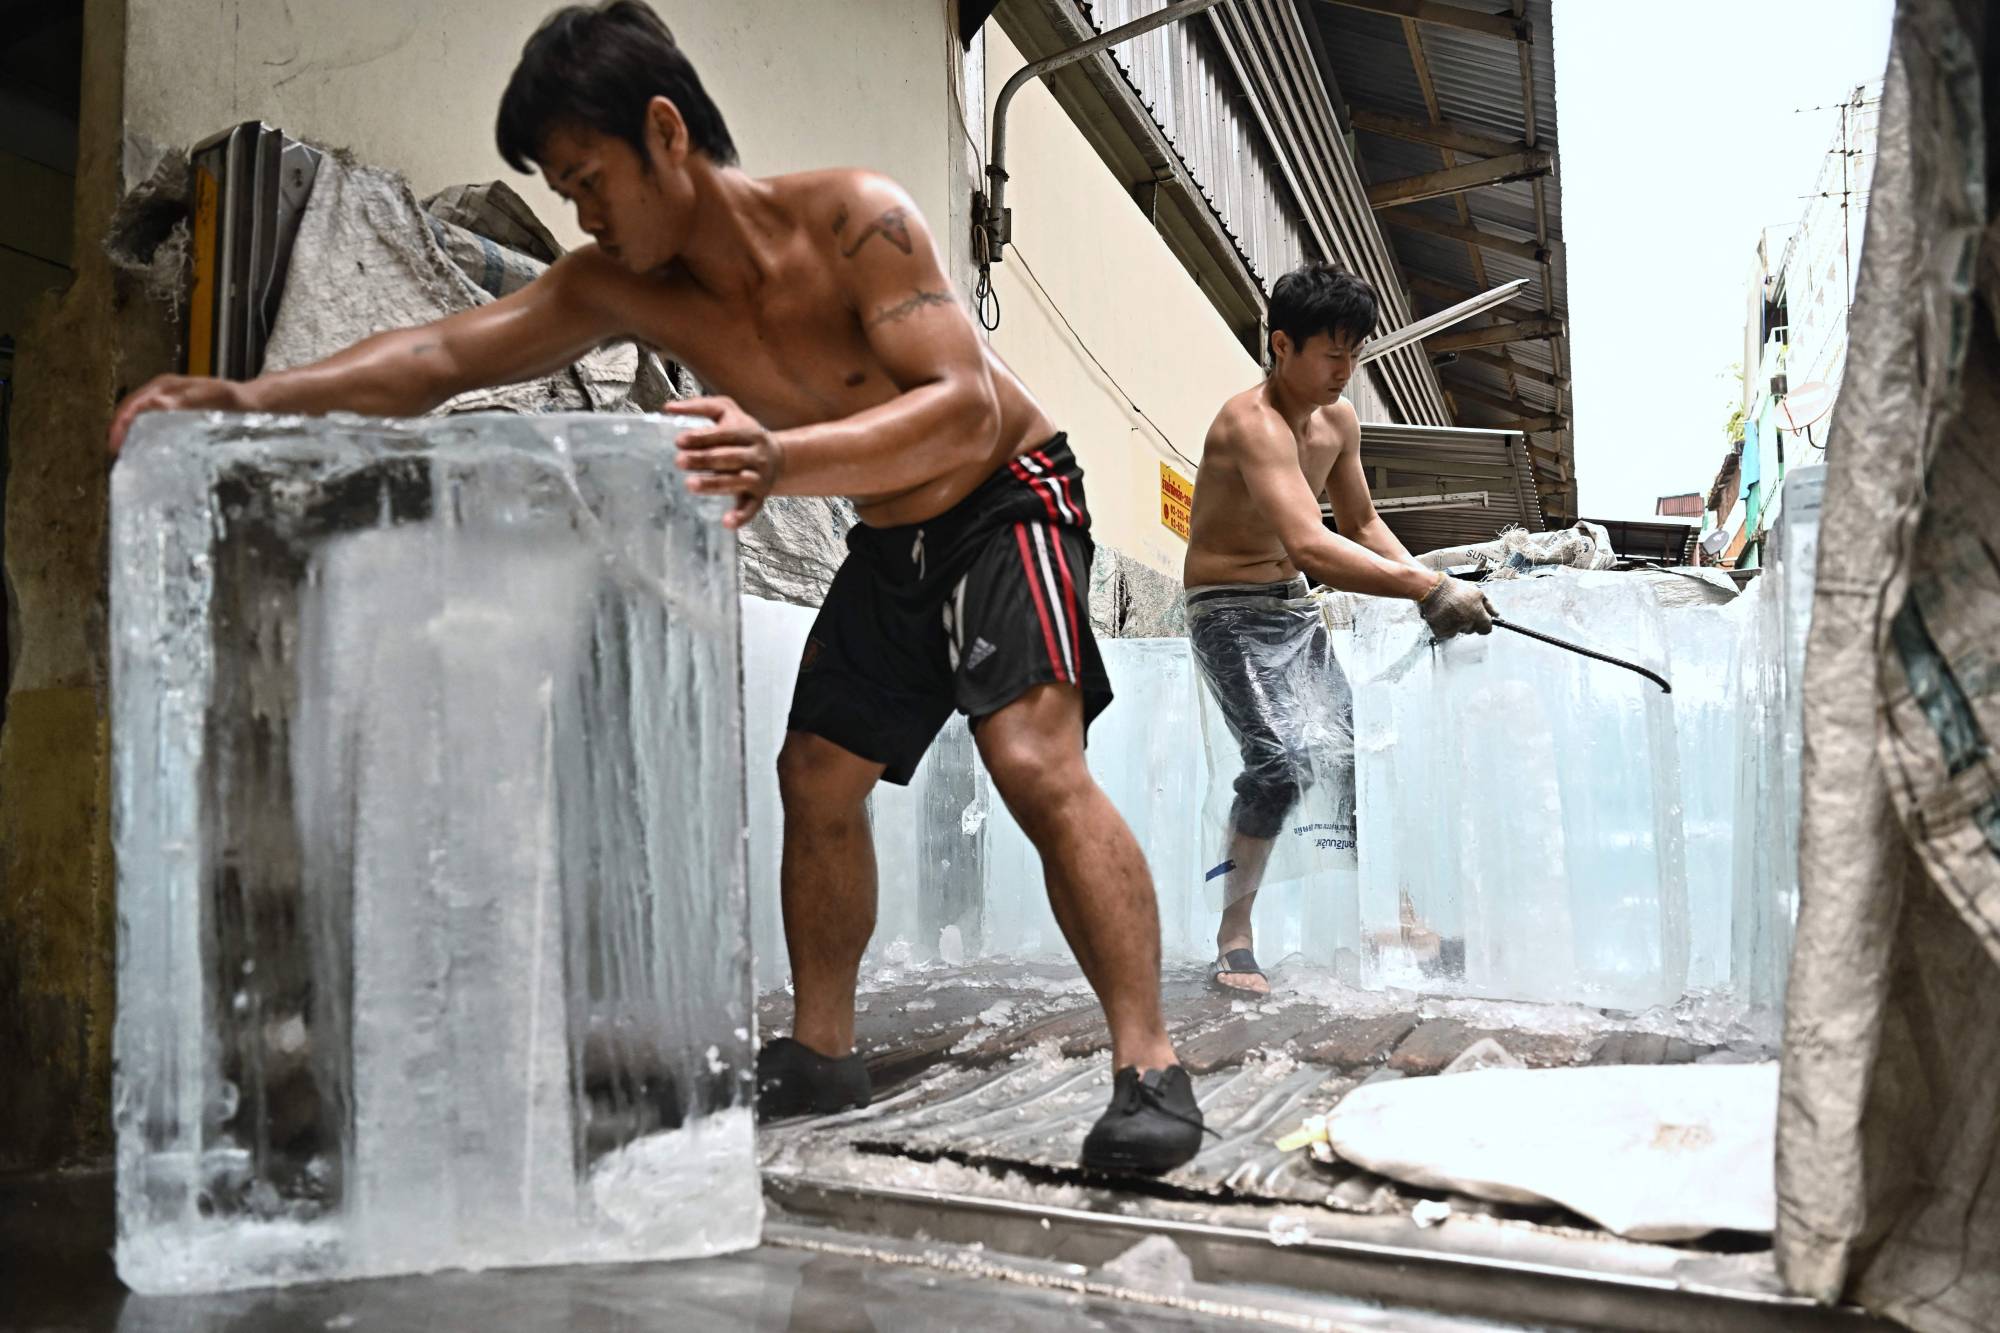 Workers move blocks of ice into a storage unit during a heat wave in Bangkok last month.  | AFP-JIJI